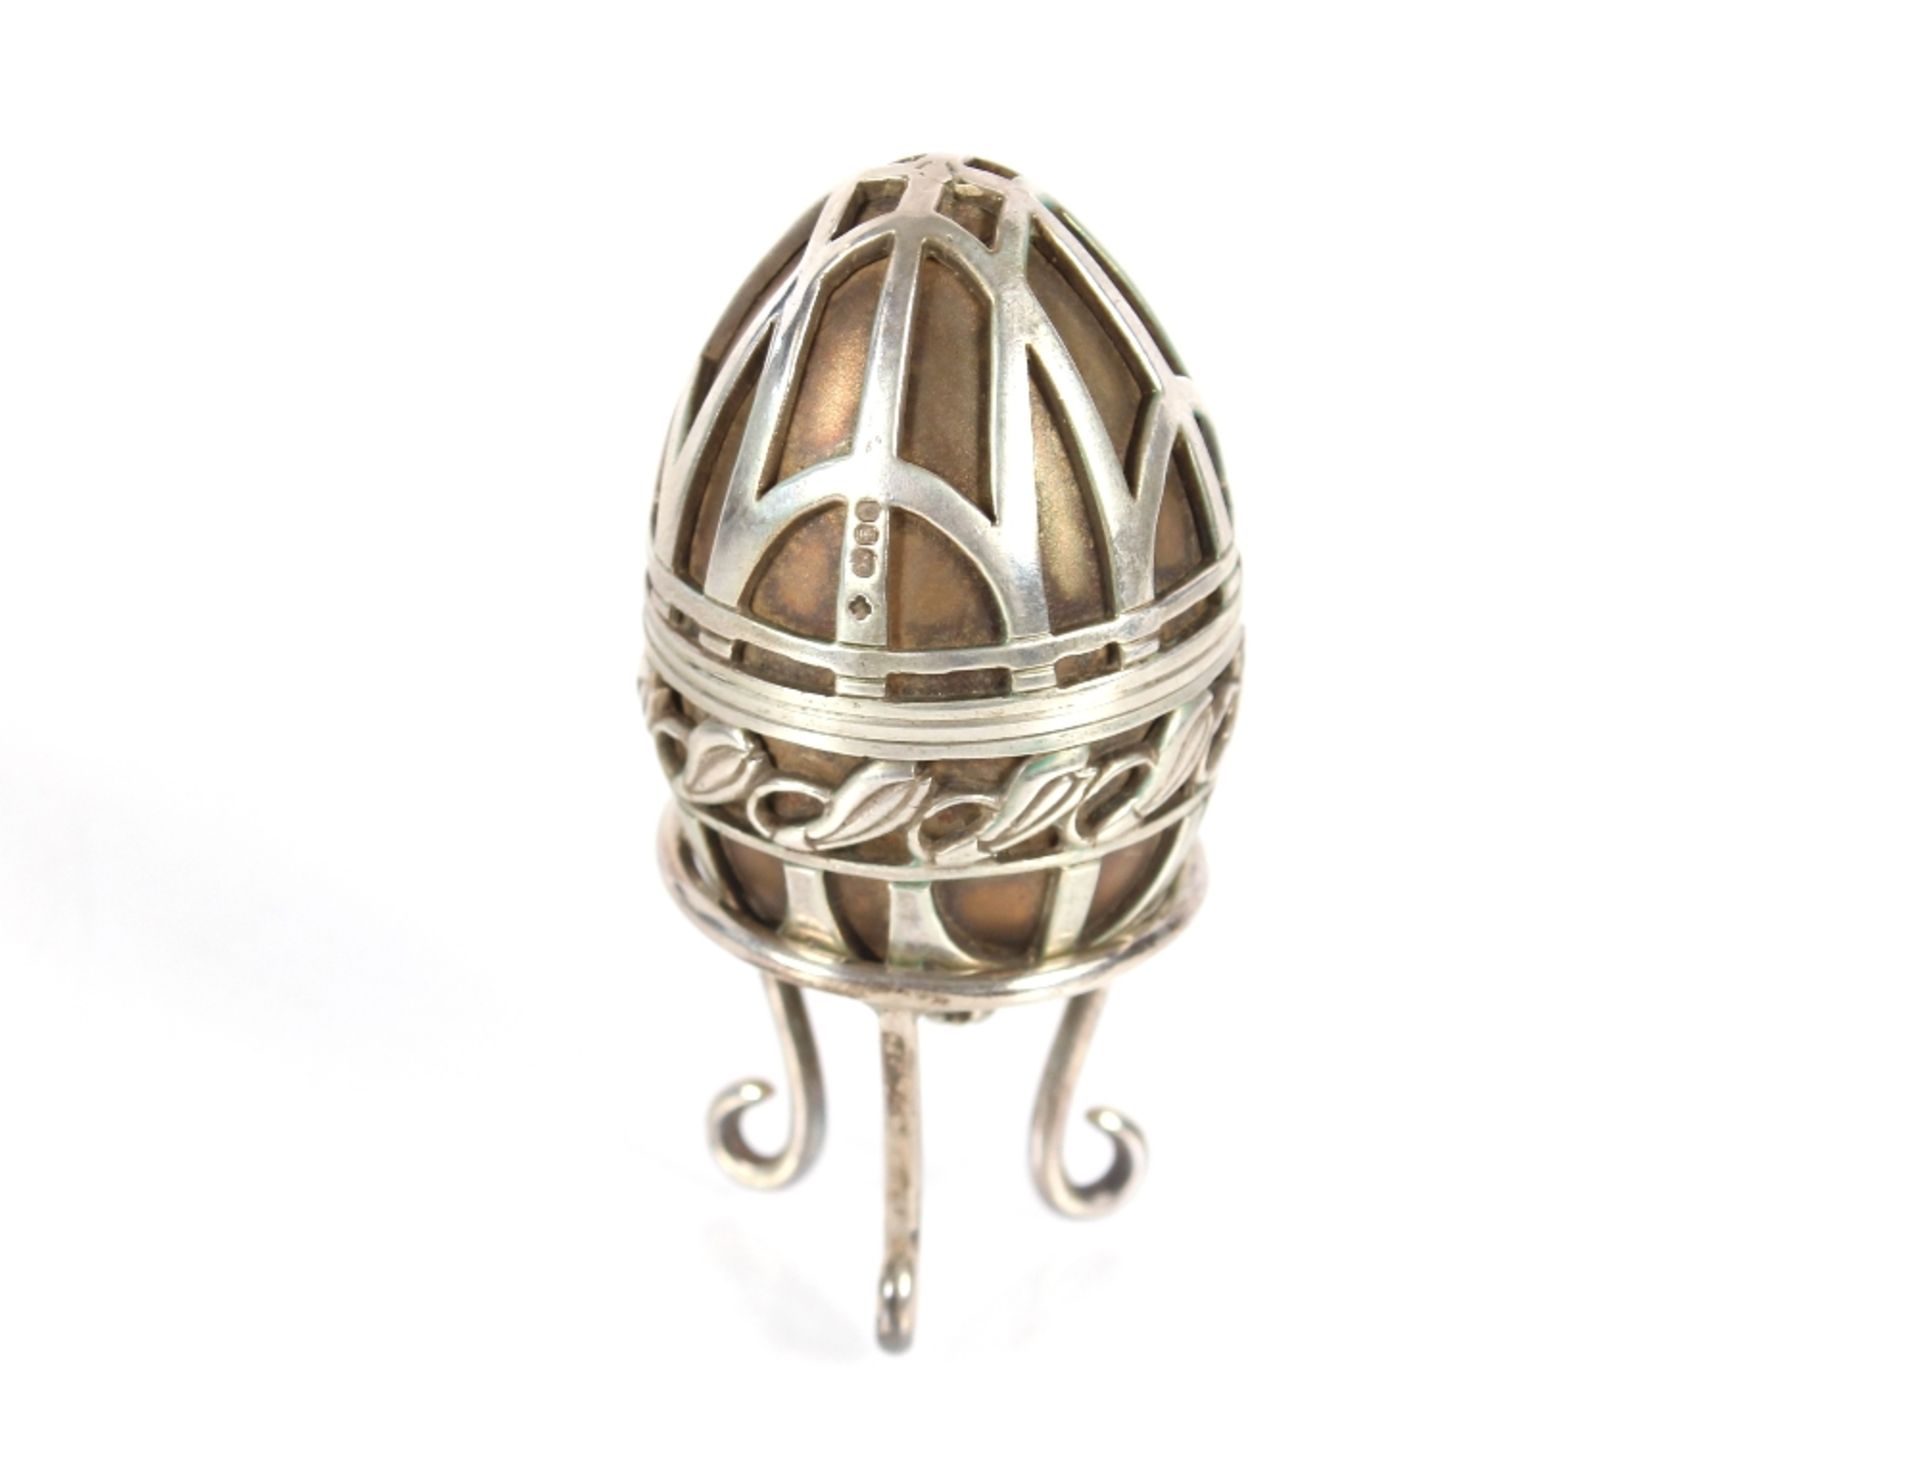 A St. James House silver gilt Easter Egg in original box limited edition 150/ 500